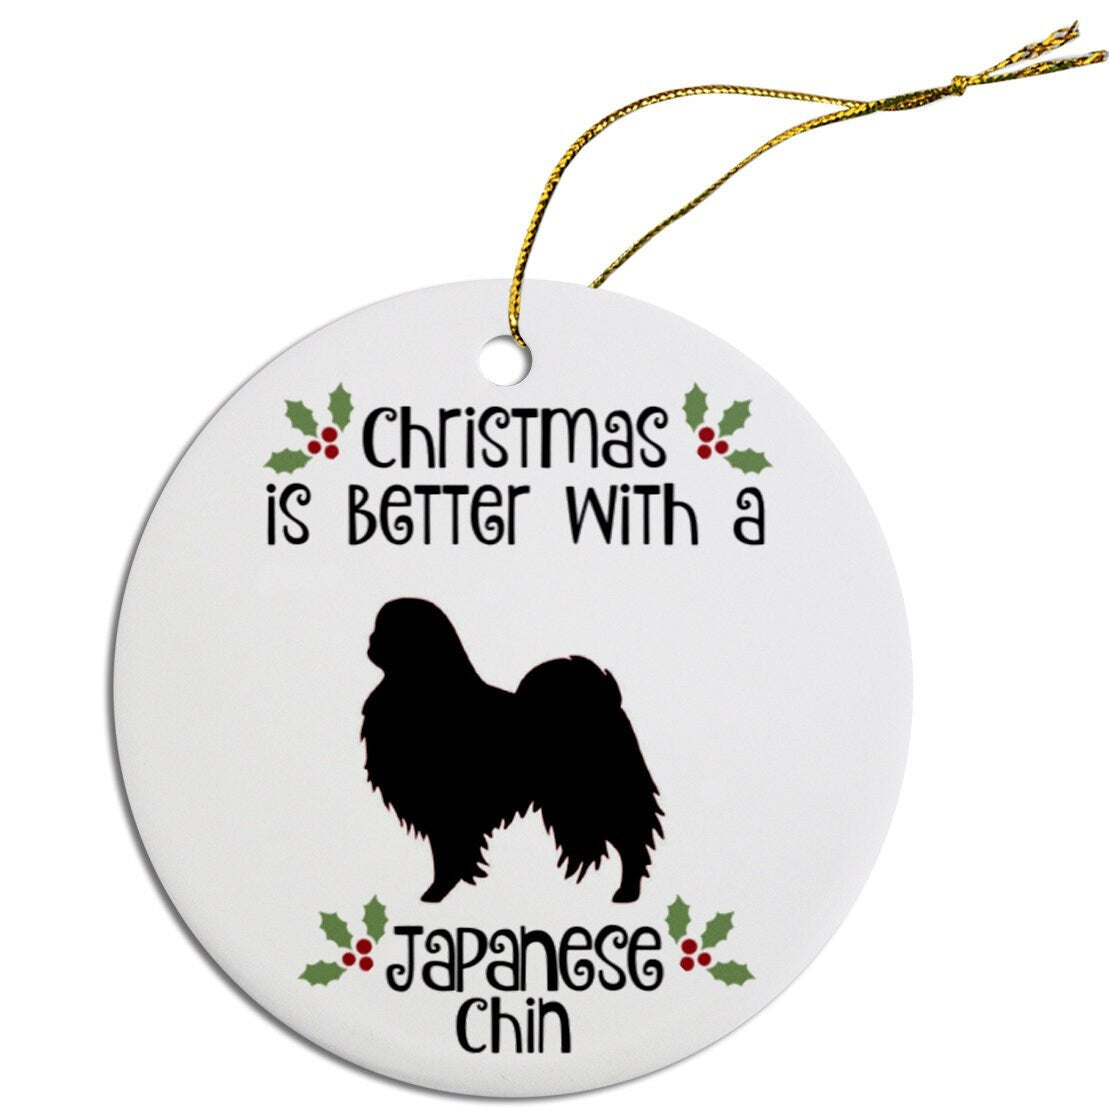 Dog Breed Specific Round Christmas Ornament, "Japanese Chin"